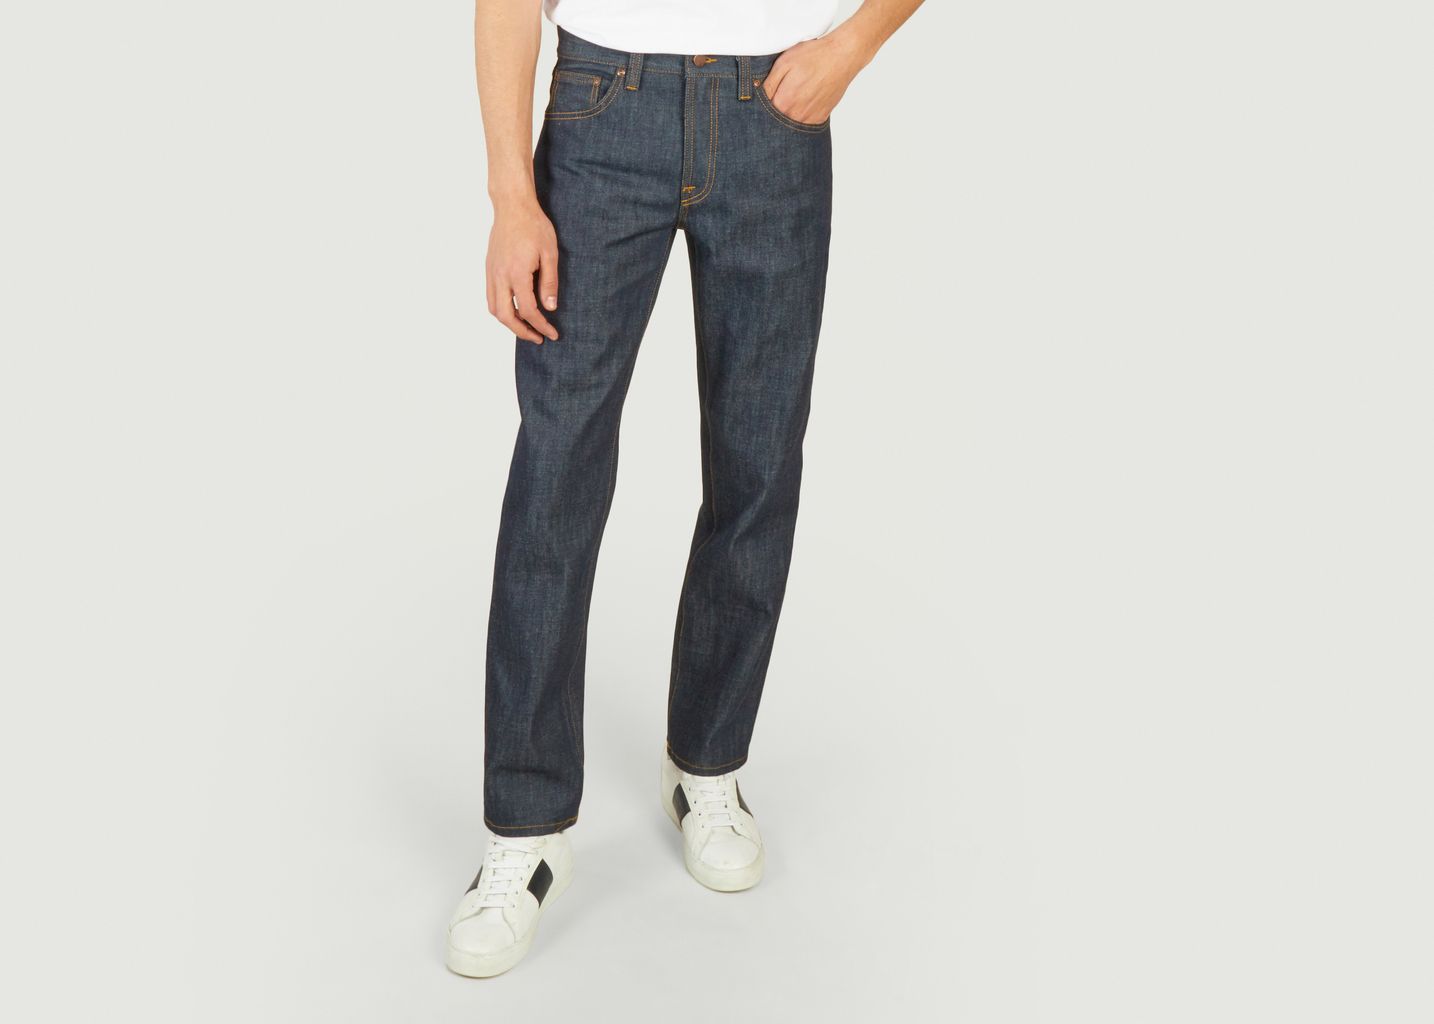 Gritty Jackson jeans - Nudie Jeans